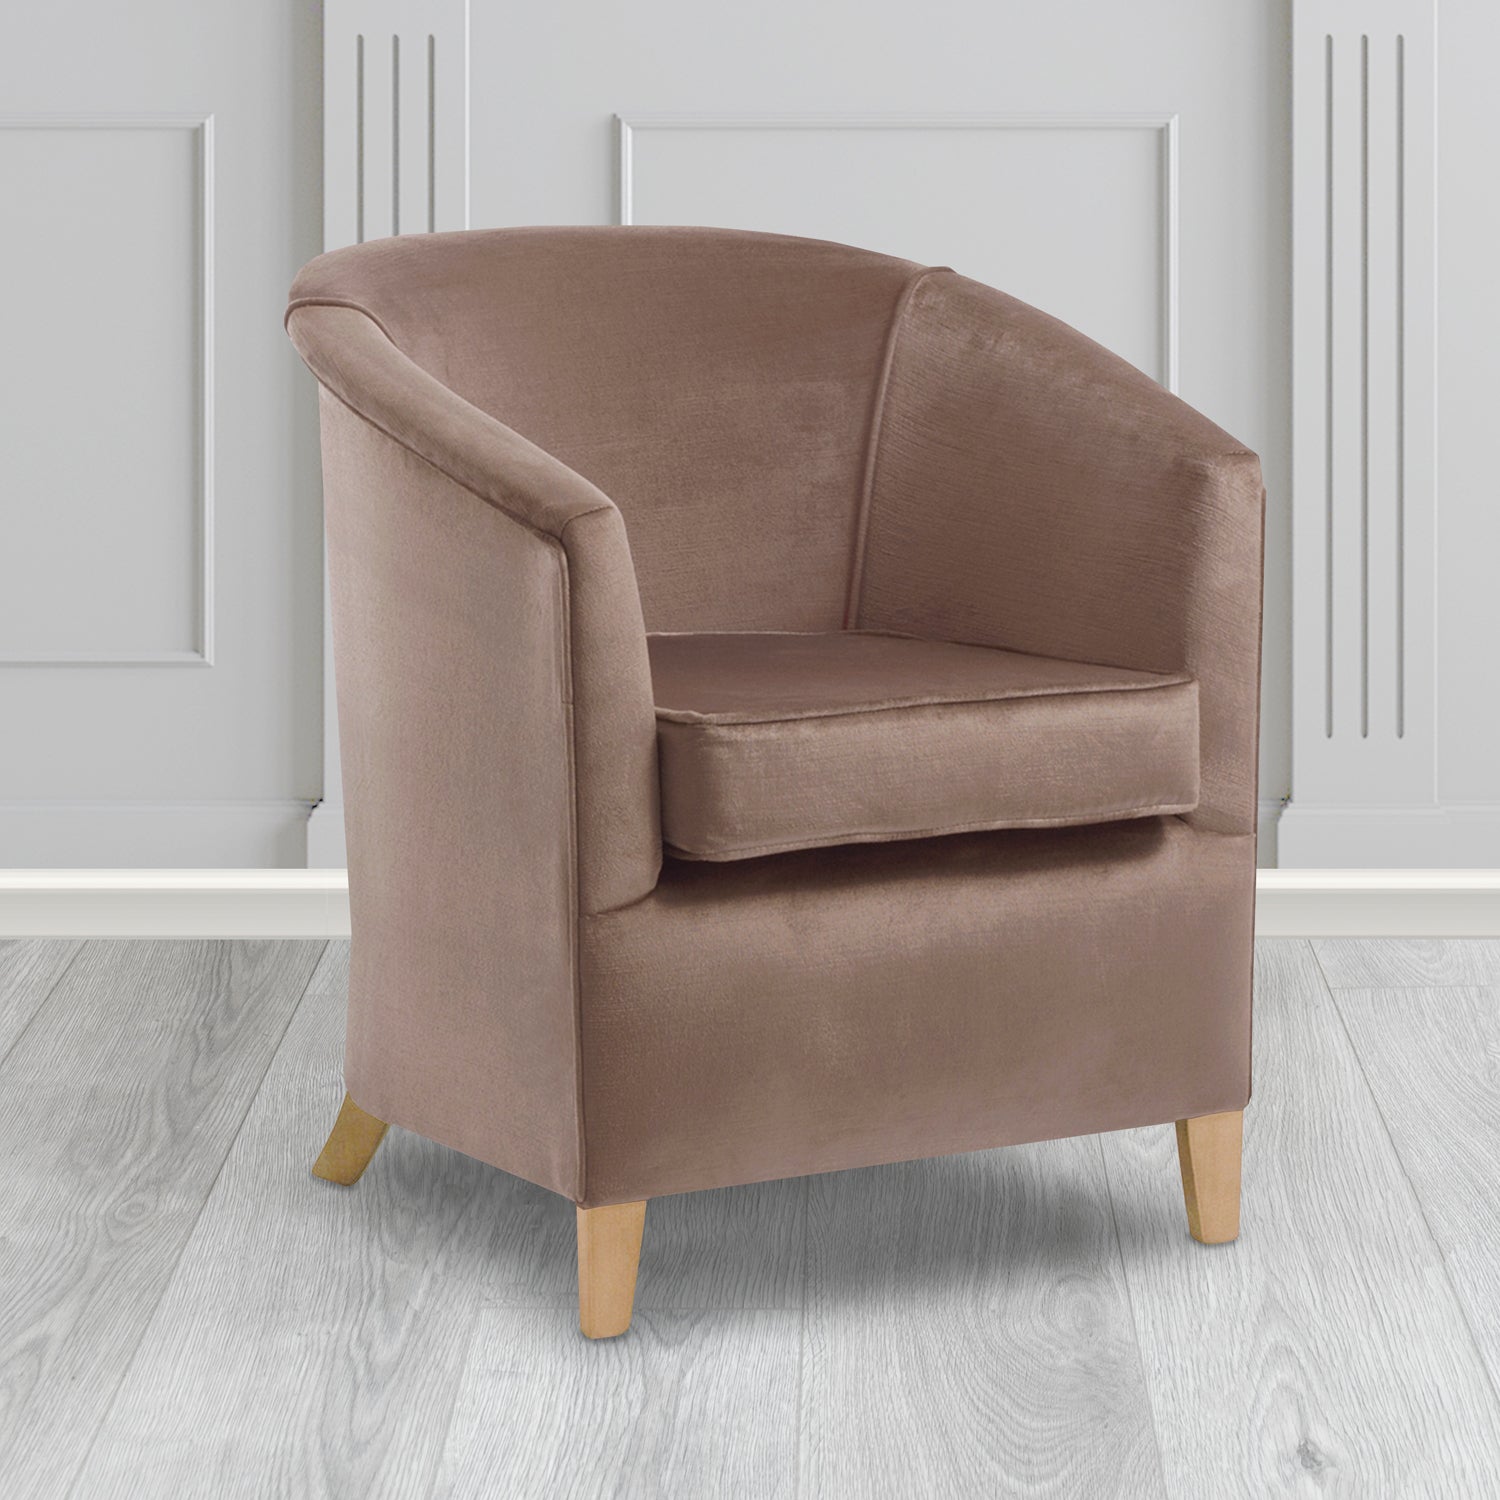 Jasmine Tub Chair in Noble 708 Truffle Crib 5 Velvet Fabric - Water Resistant - The Tub Chair Shop